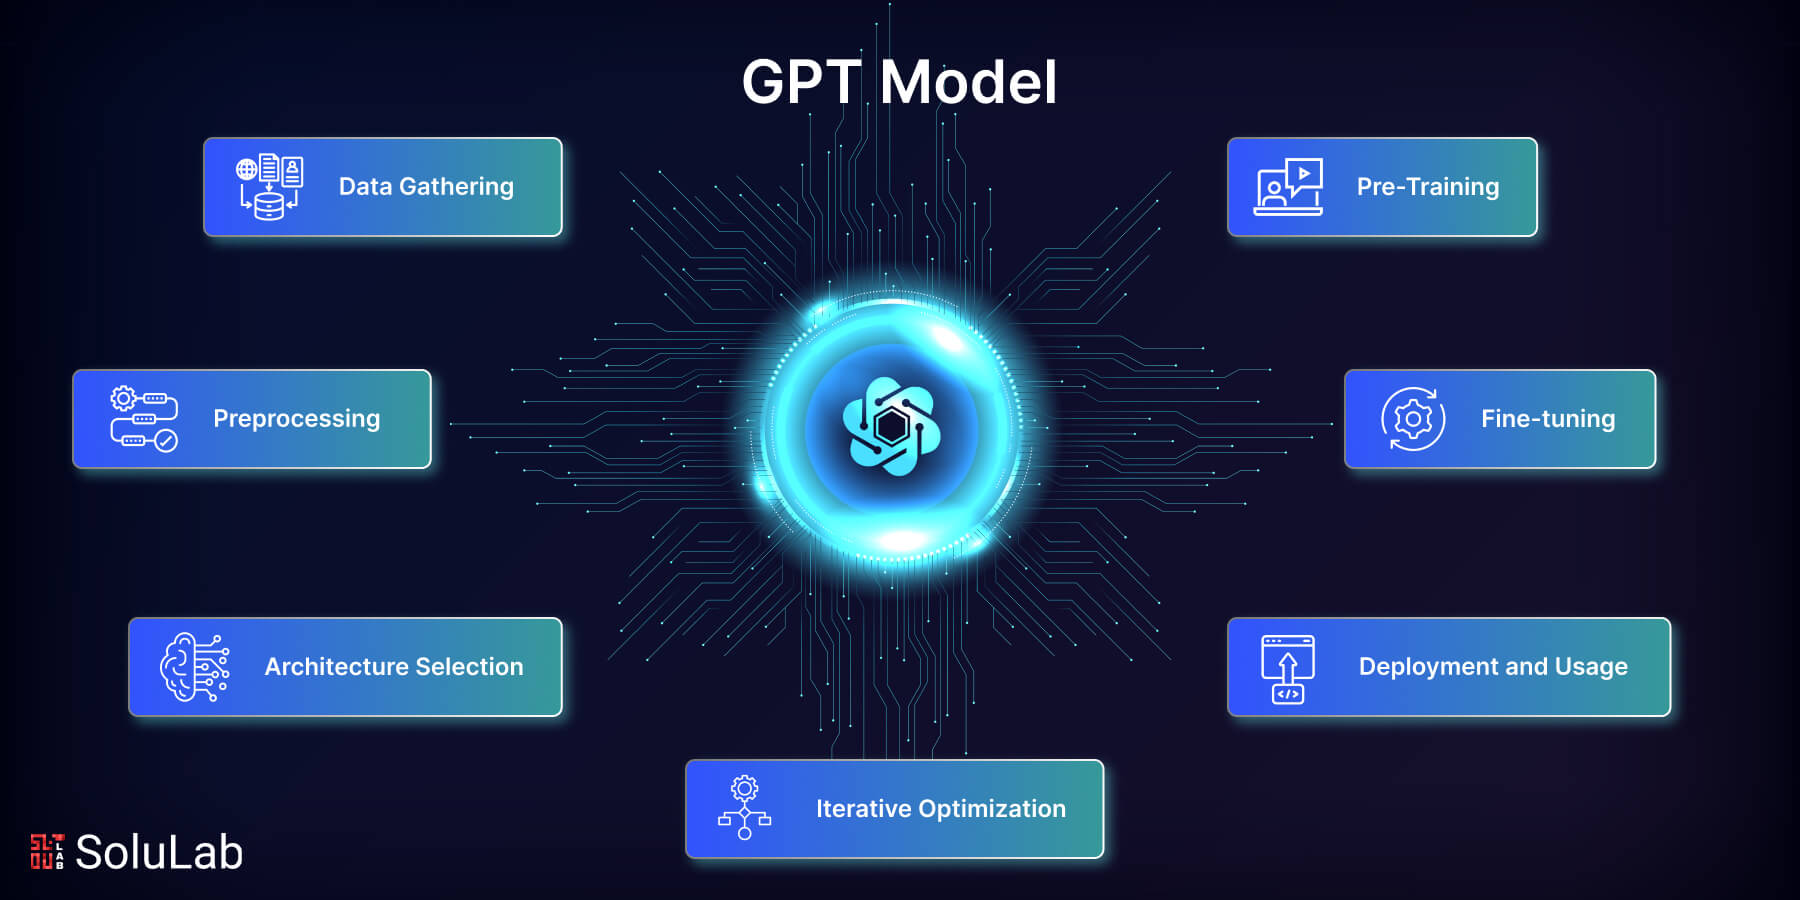 How to Build Your Own GPT Model?